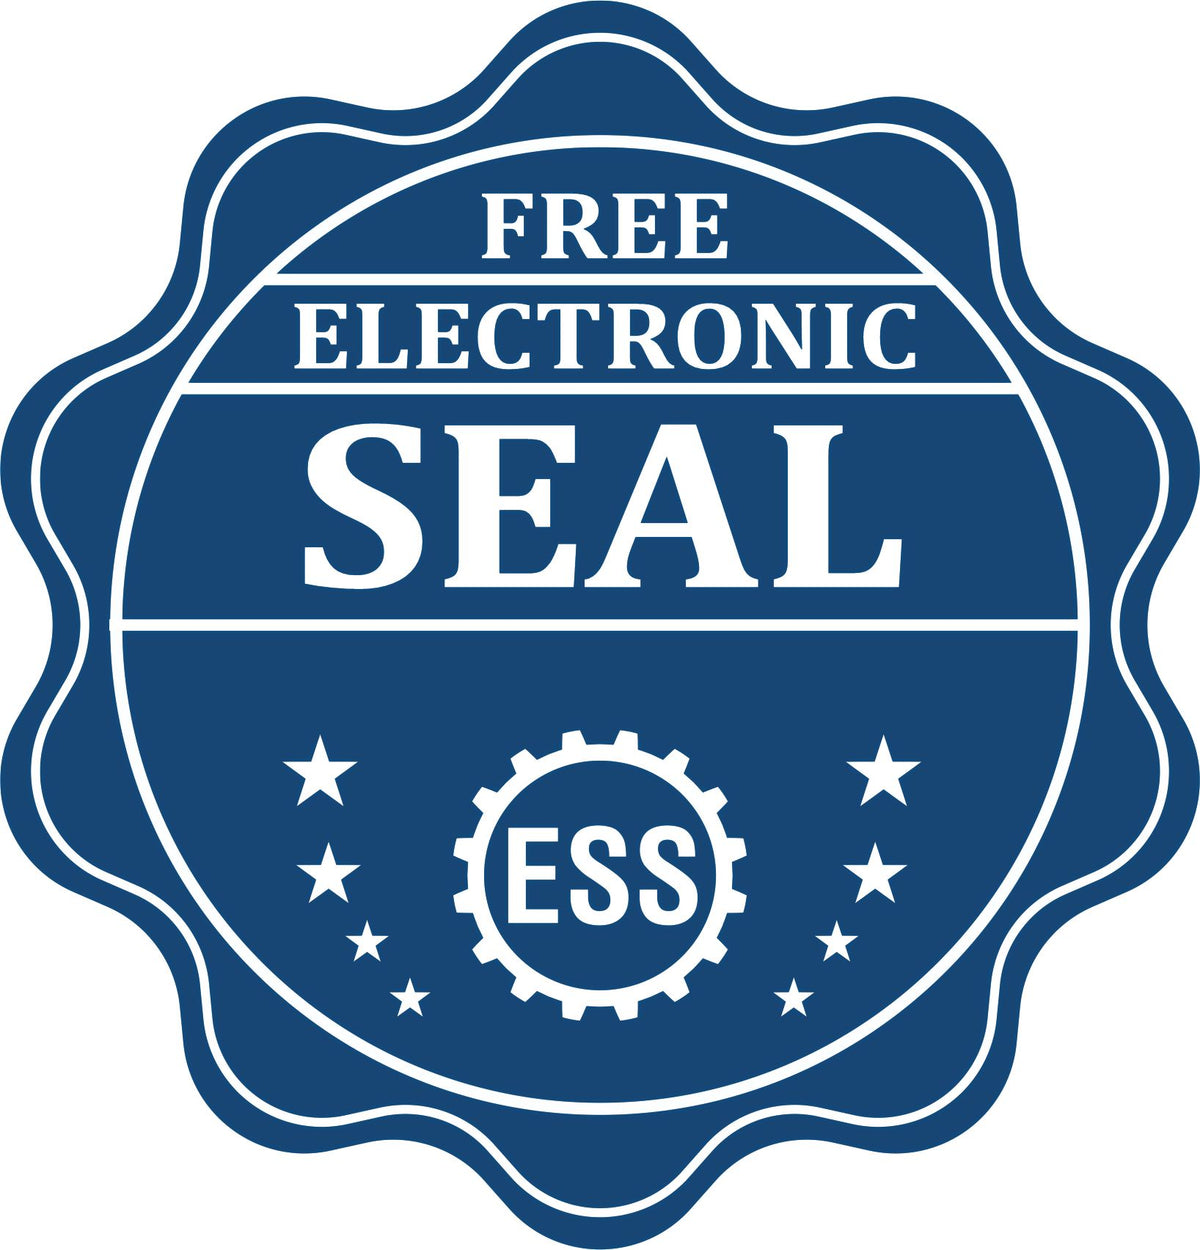 A badge showing a free electronic seal for the Florida Desk Architect Embossing Seal with stars and the ESS gear on the emblem.